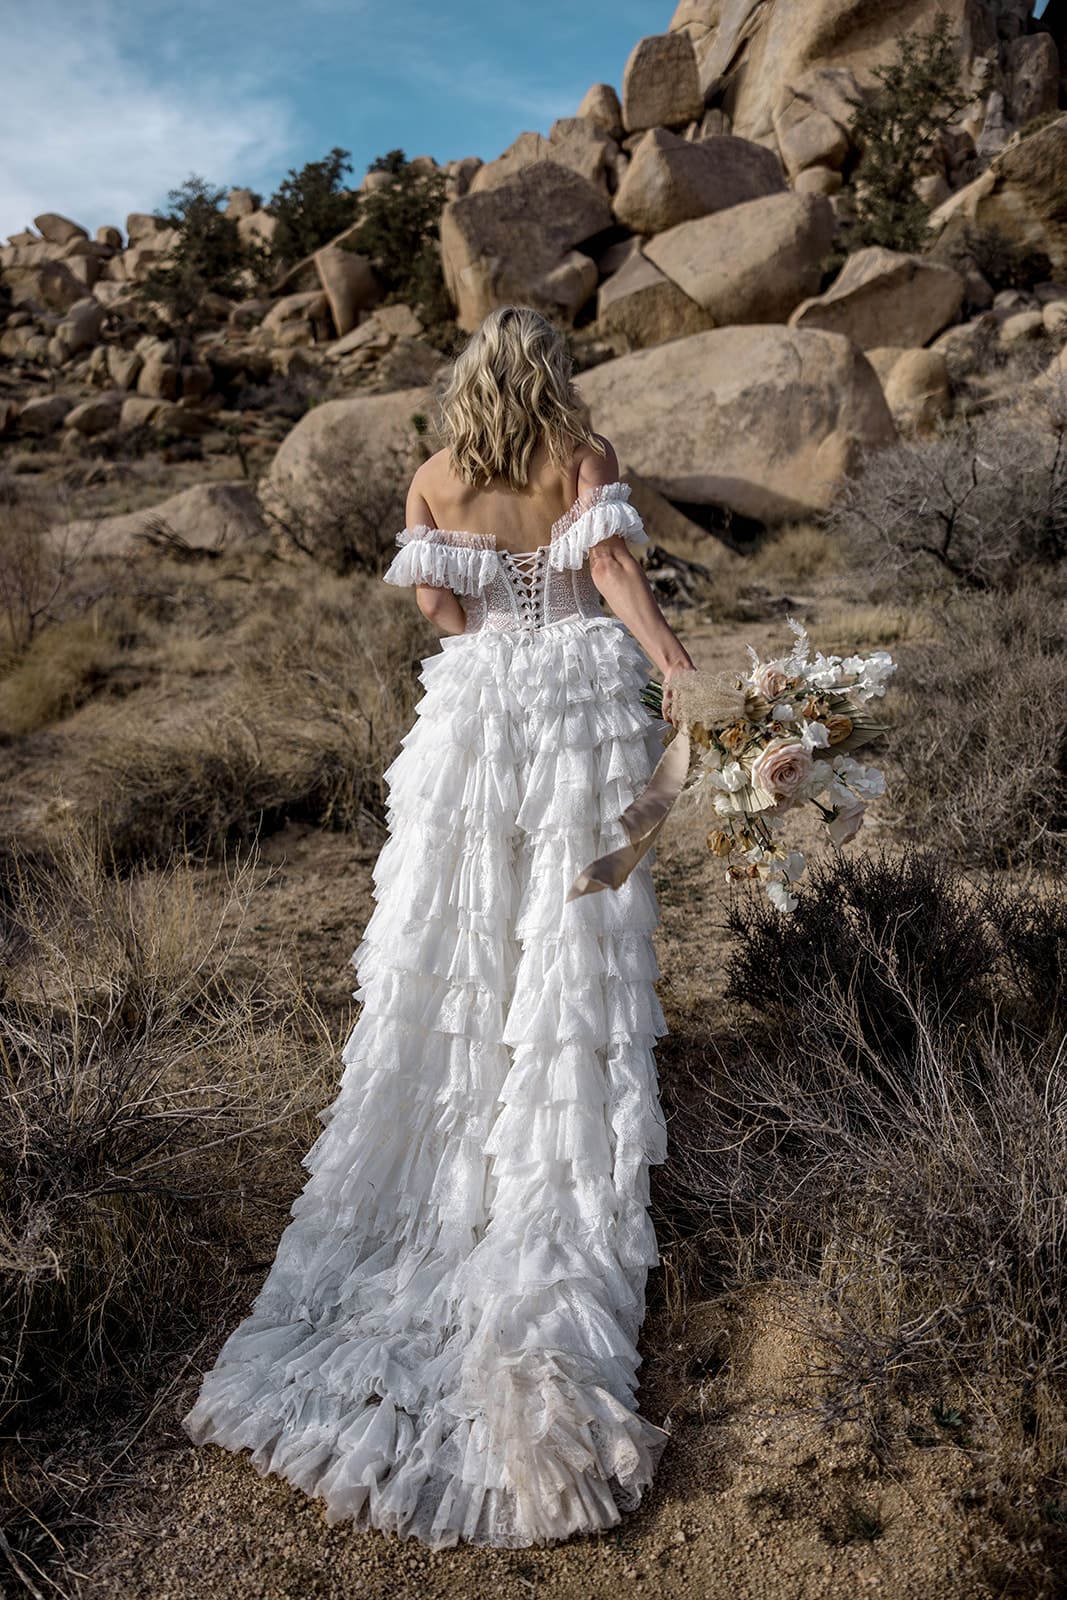 Bride wearing couture bridal gown walks in desert for elopement ceremony